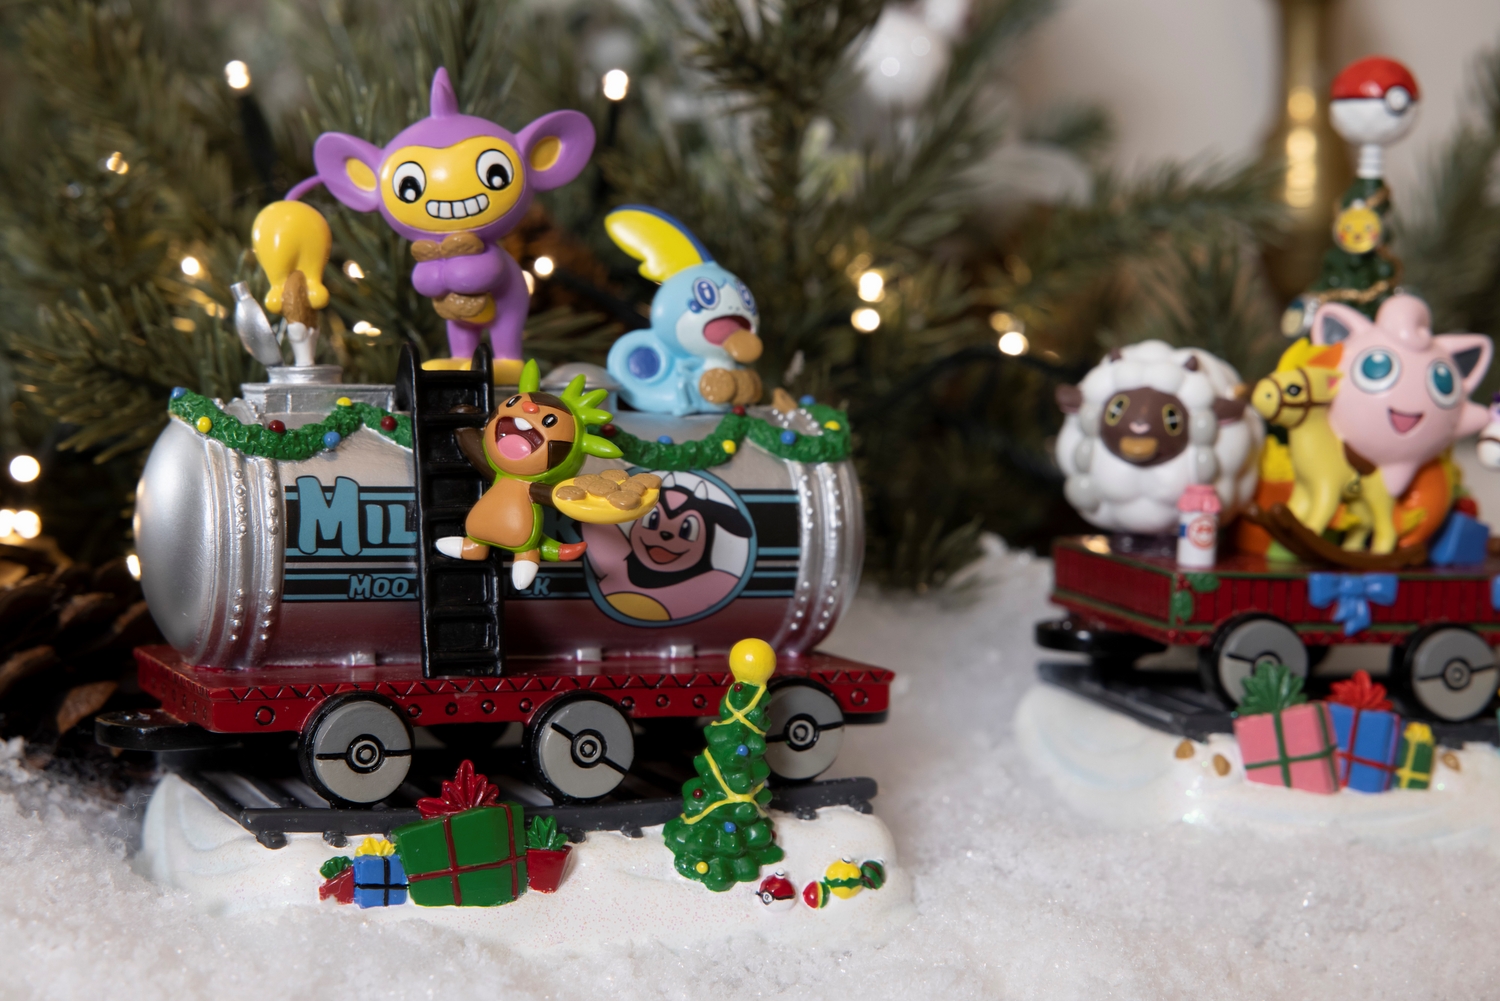 Delibird_Holiday_Express_Figures_Group_2_Lifestyle_Image.jpg